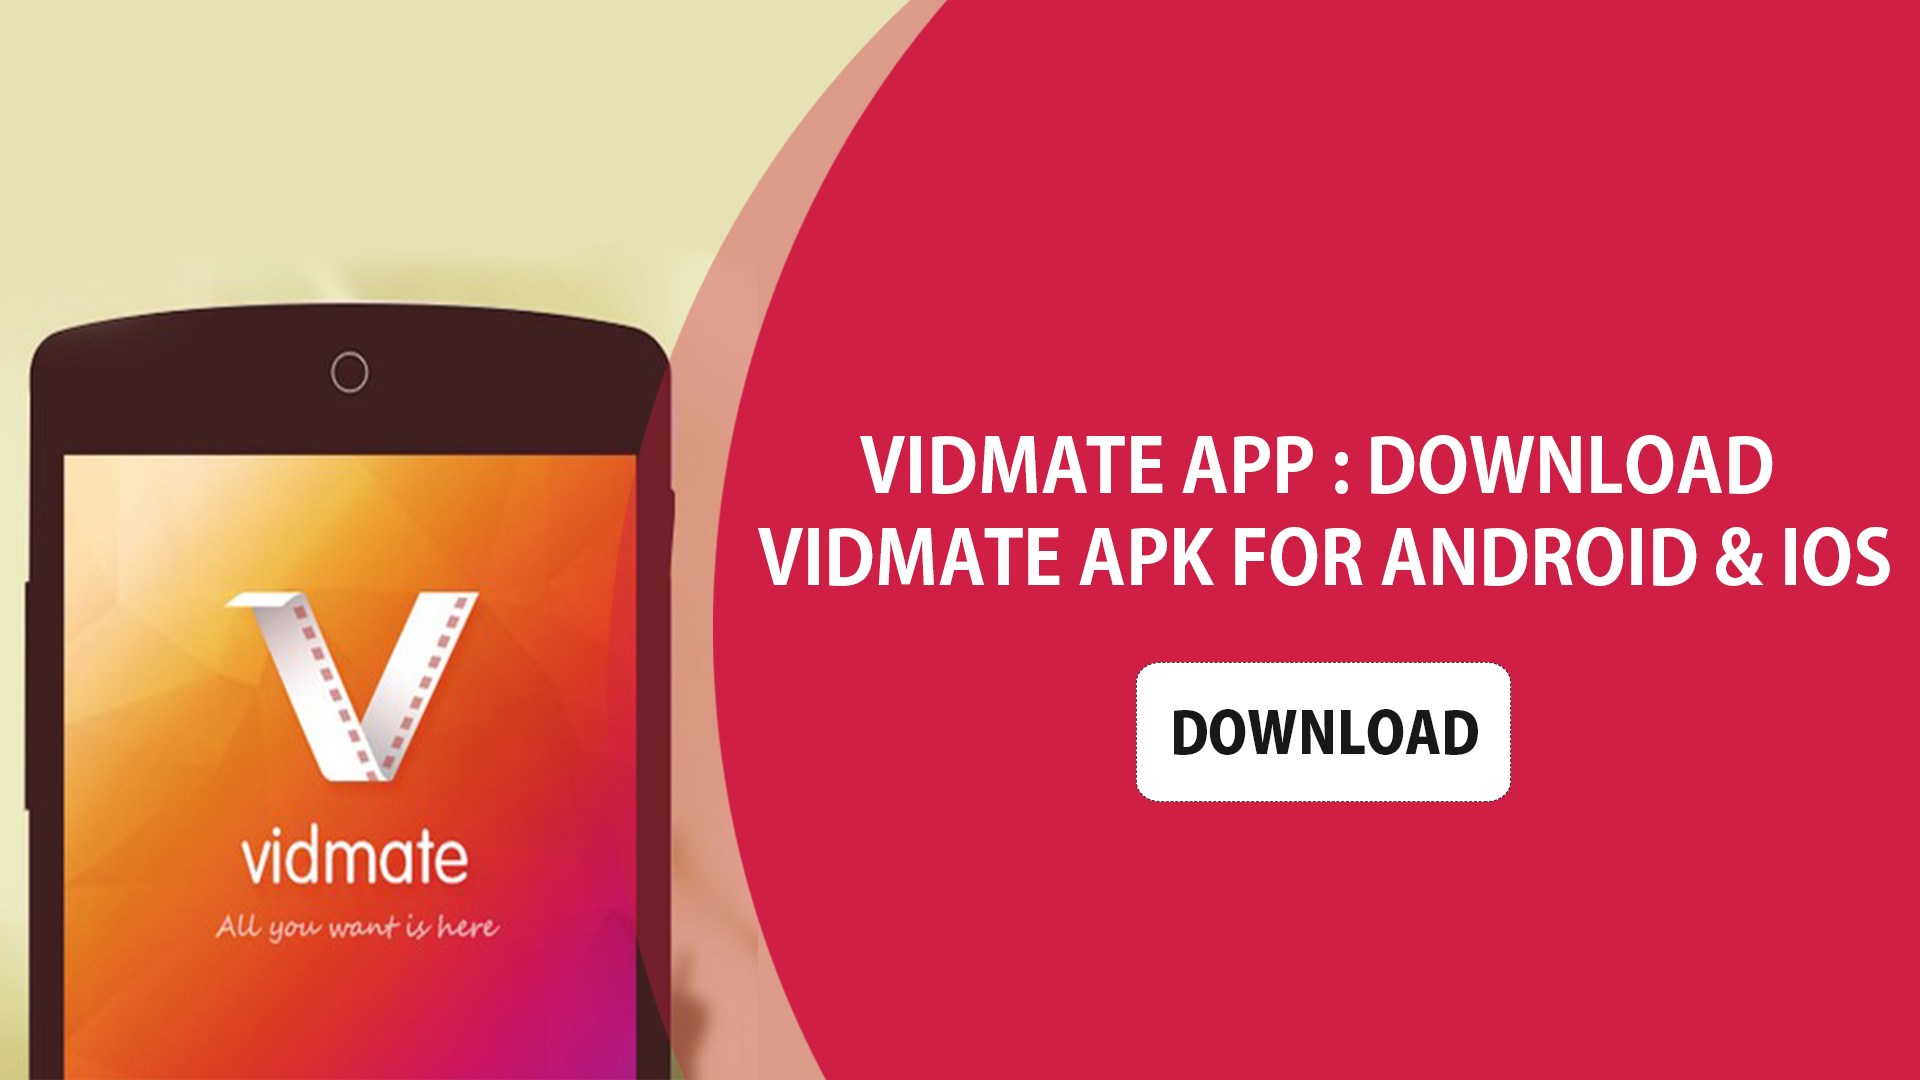 Know More Information About The Vidmate App